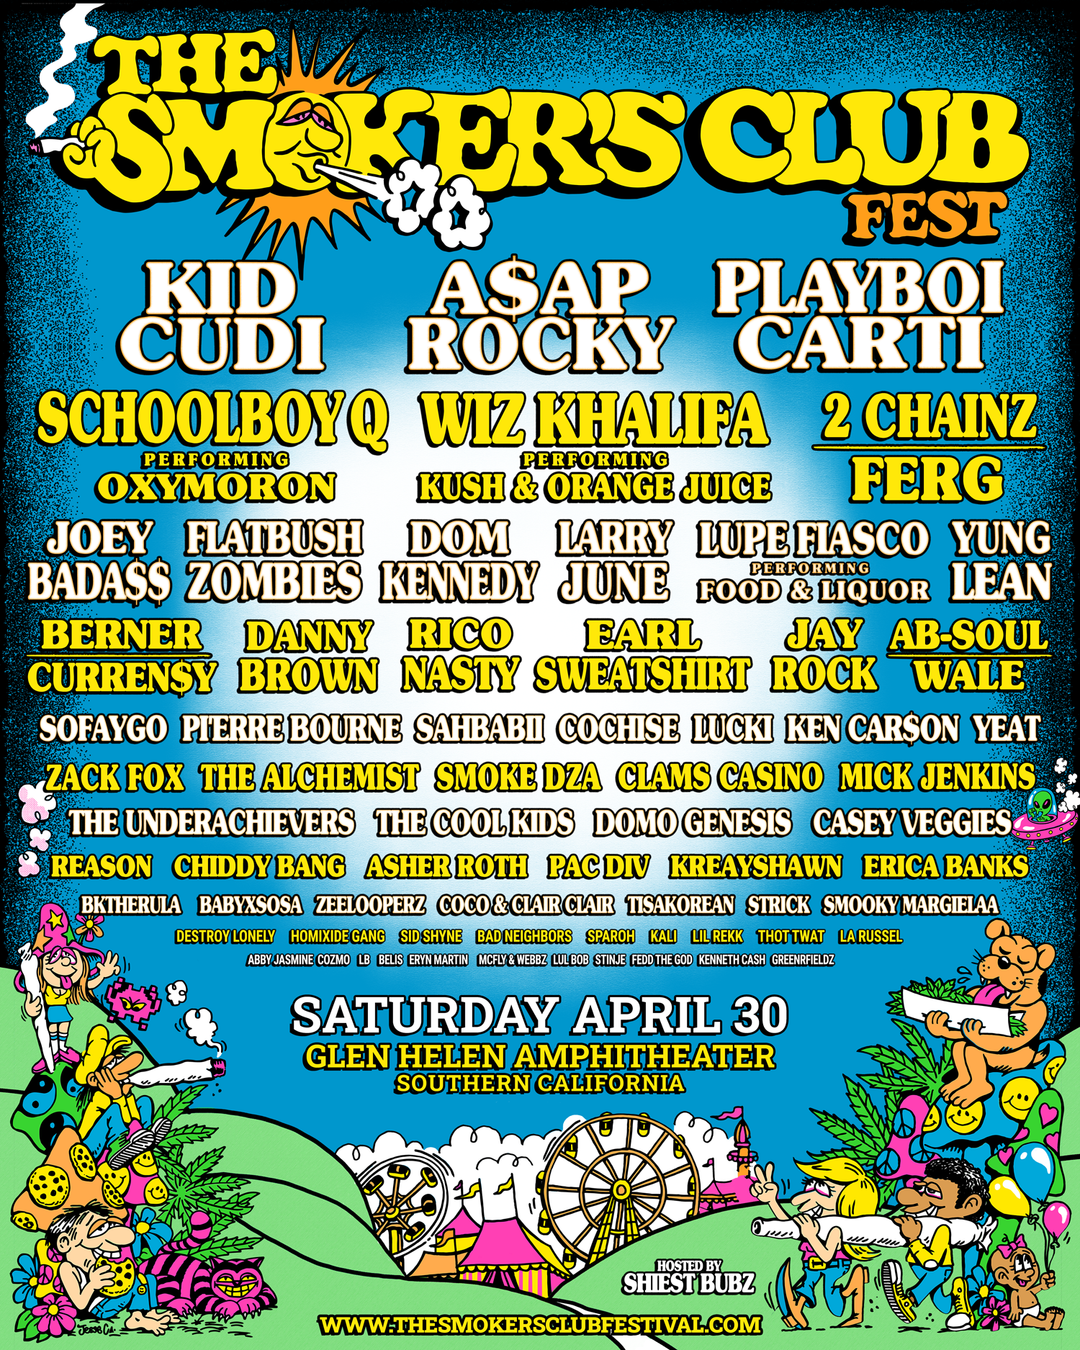 THE SMOKERS CLUB FEST IS BACK 4/30